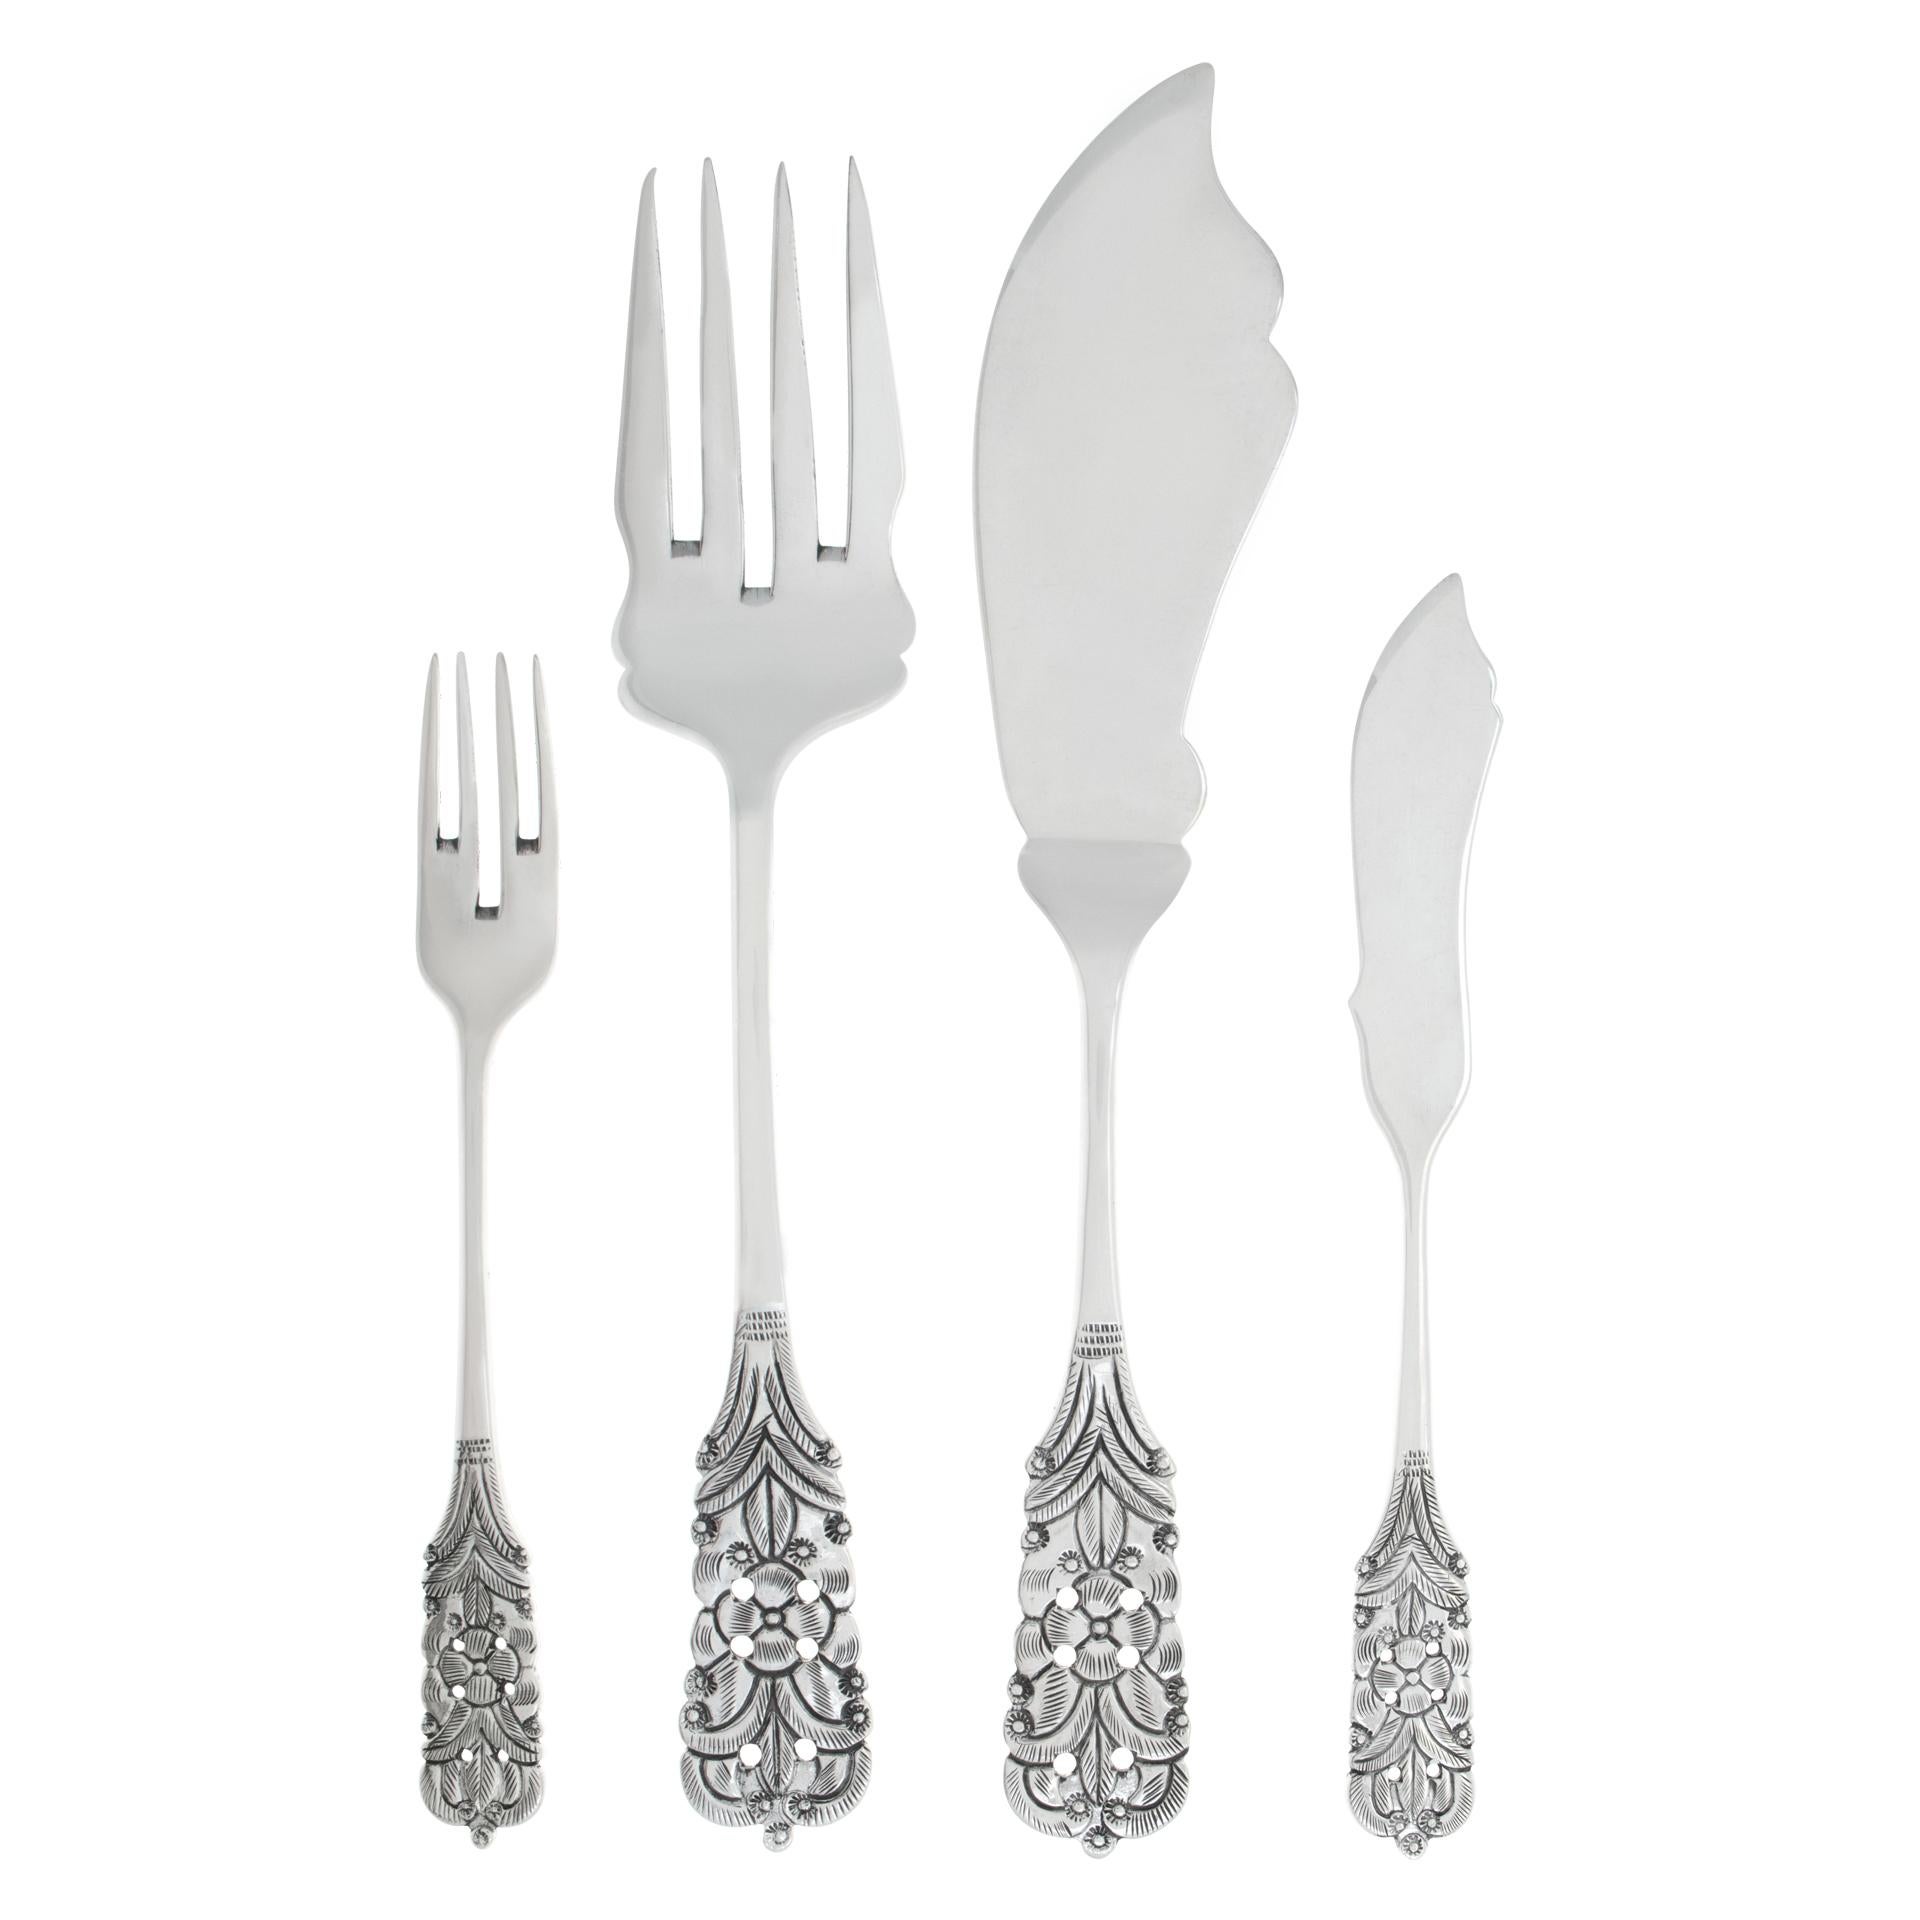 ARIAS PERU, heavy sterling flatware set. 181 pieces total, lunch, dinner, fish set and more. 14 place setting for 12 , fish set and 19 serving pieces. over 269 ounces troy of .925 sterling silver (counting all stainless steel blade pieces as 1.00